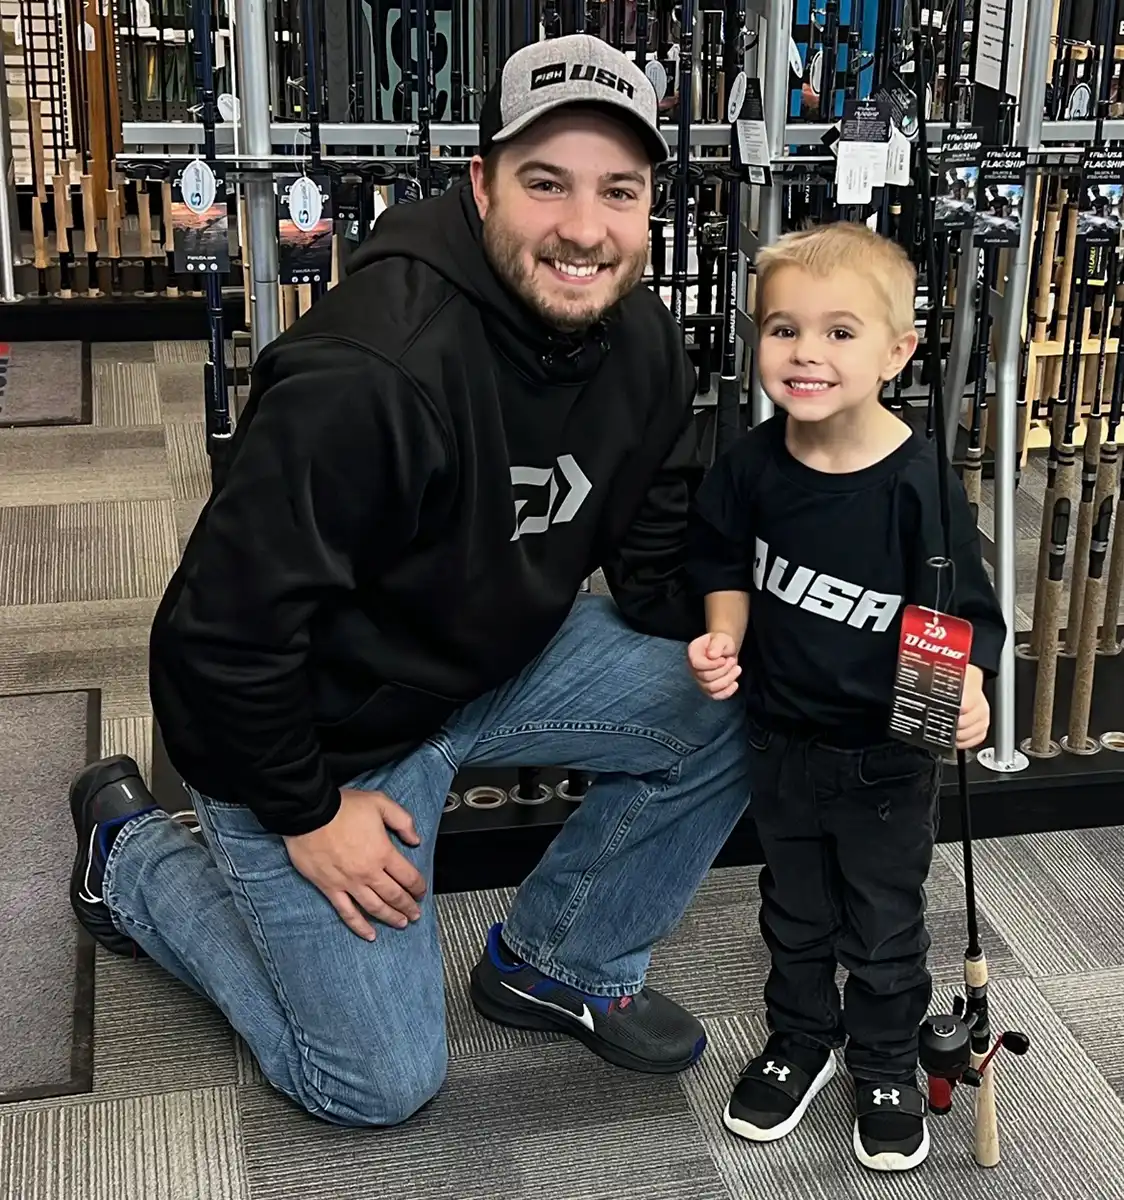 FishUSA Pro Shop Offering First 100 Kids Free Rod and Reel on